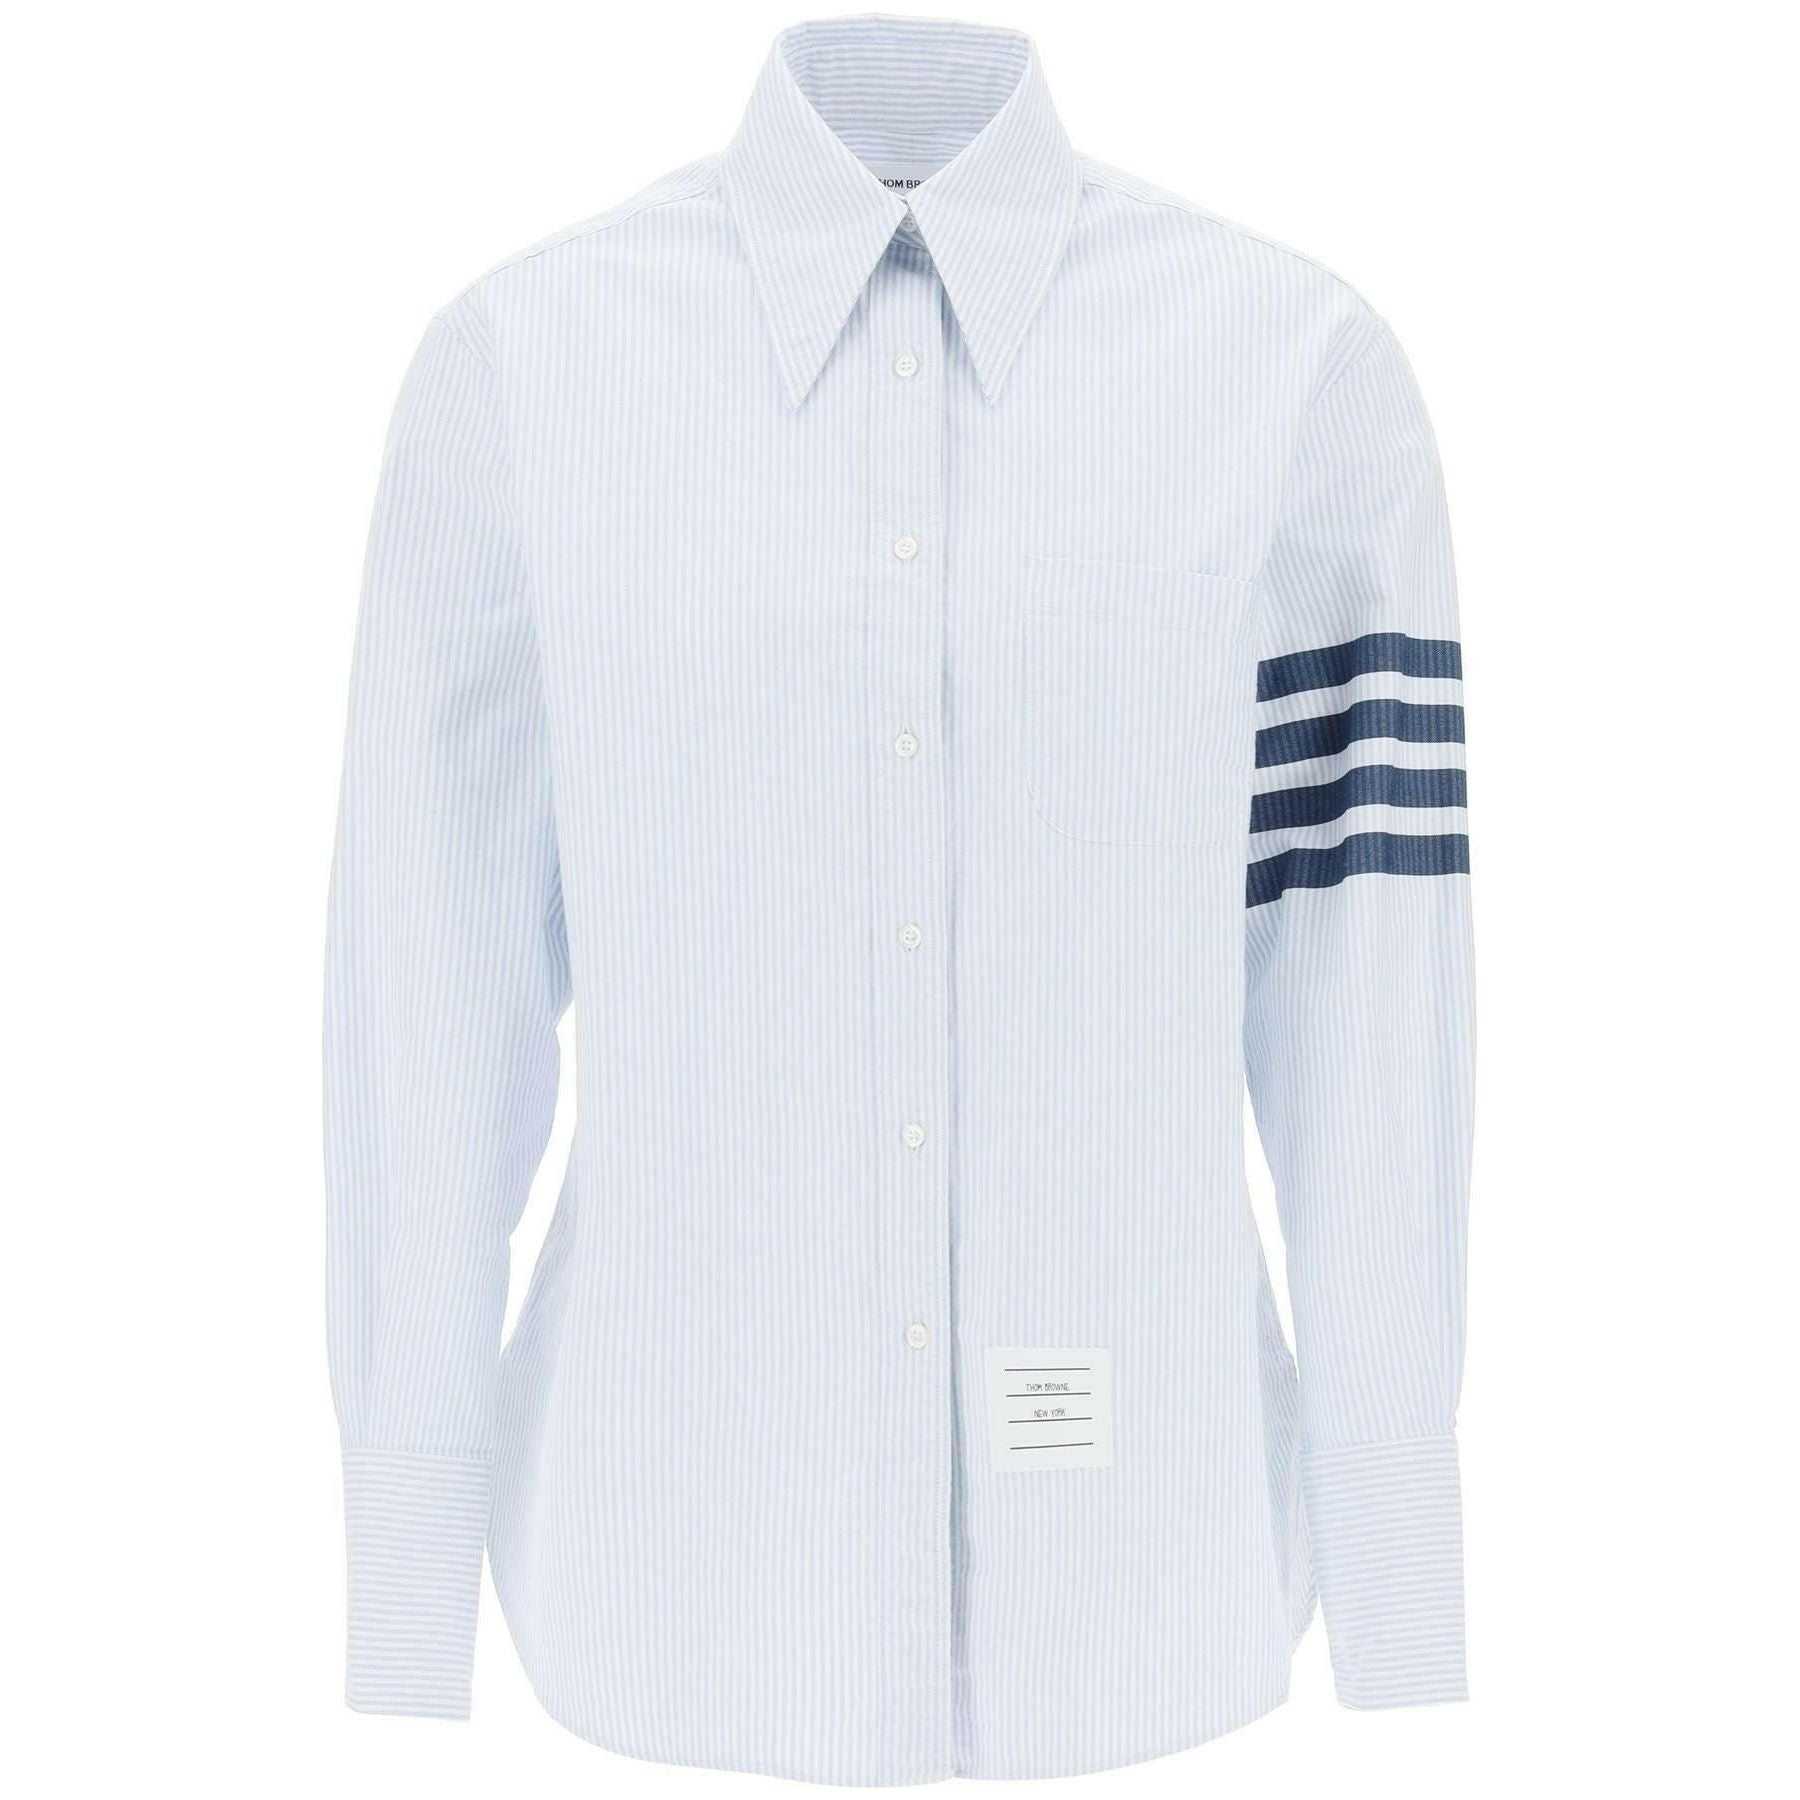 Striped Oxford Shirt With Pointed Collar THOM BROWNE JOHN JULIA.